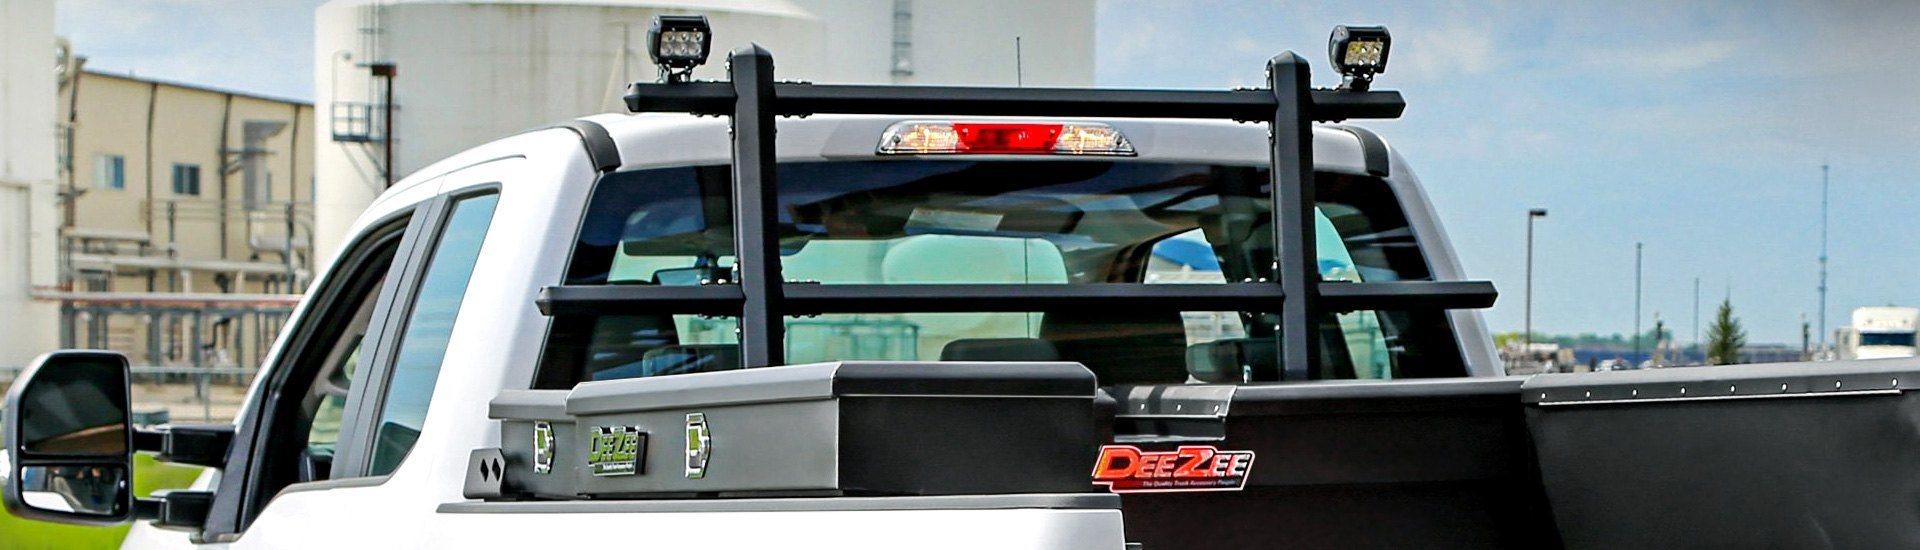 Protect Your Cab From Damage With Brand-New Dee Zee Hex Cab Rack